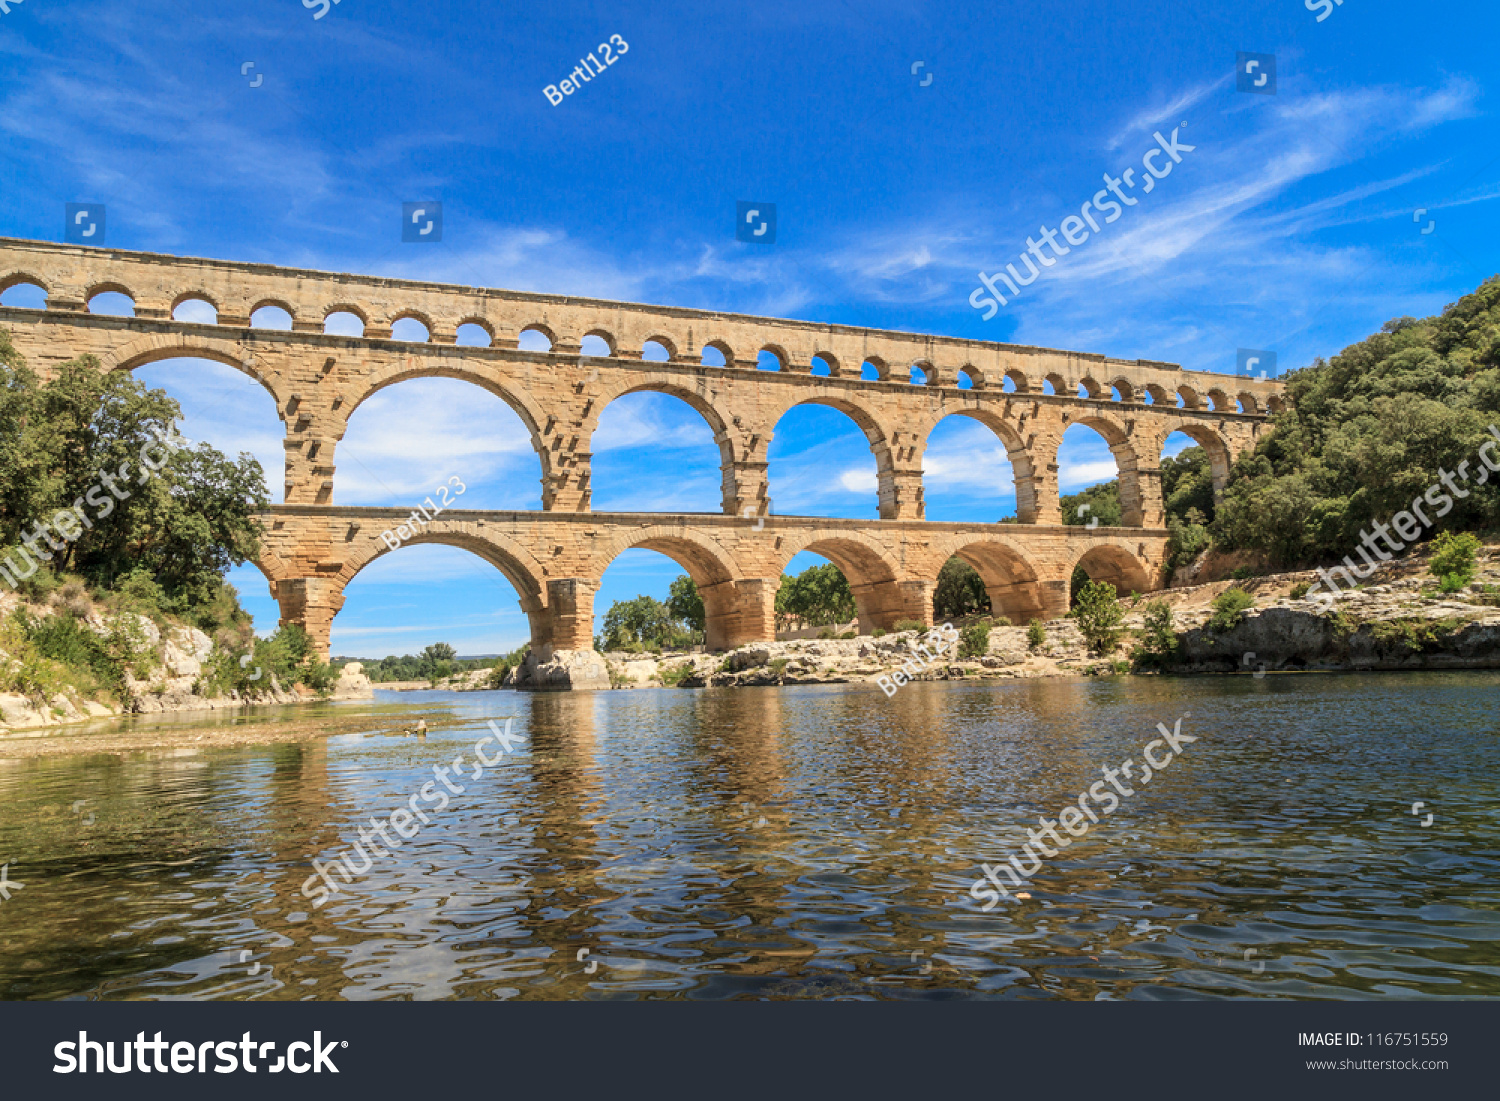 How Old Is The Aqueduct At Nimes 4